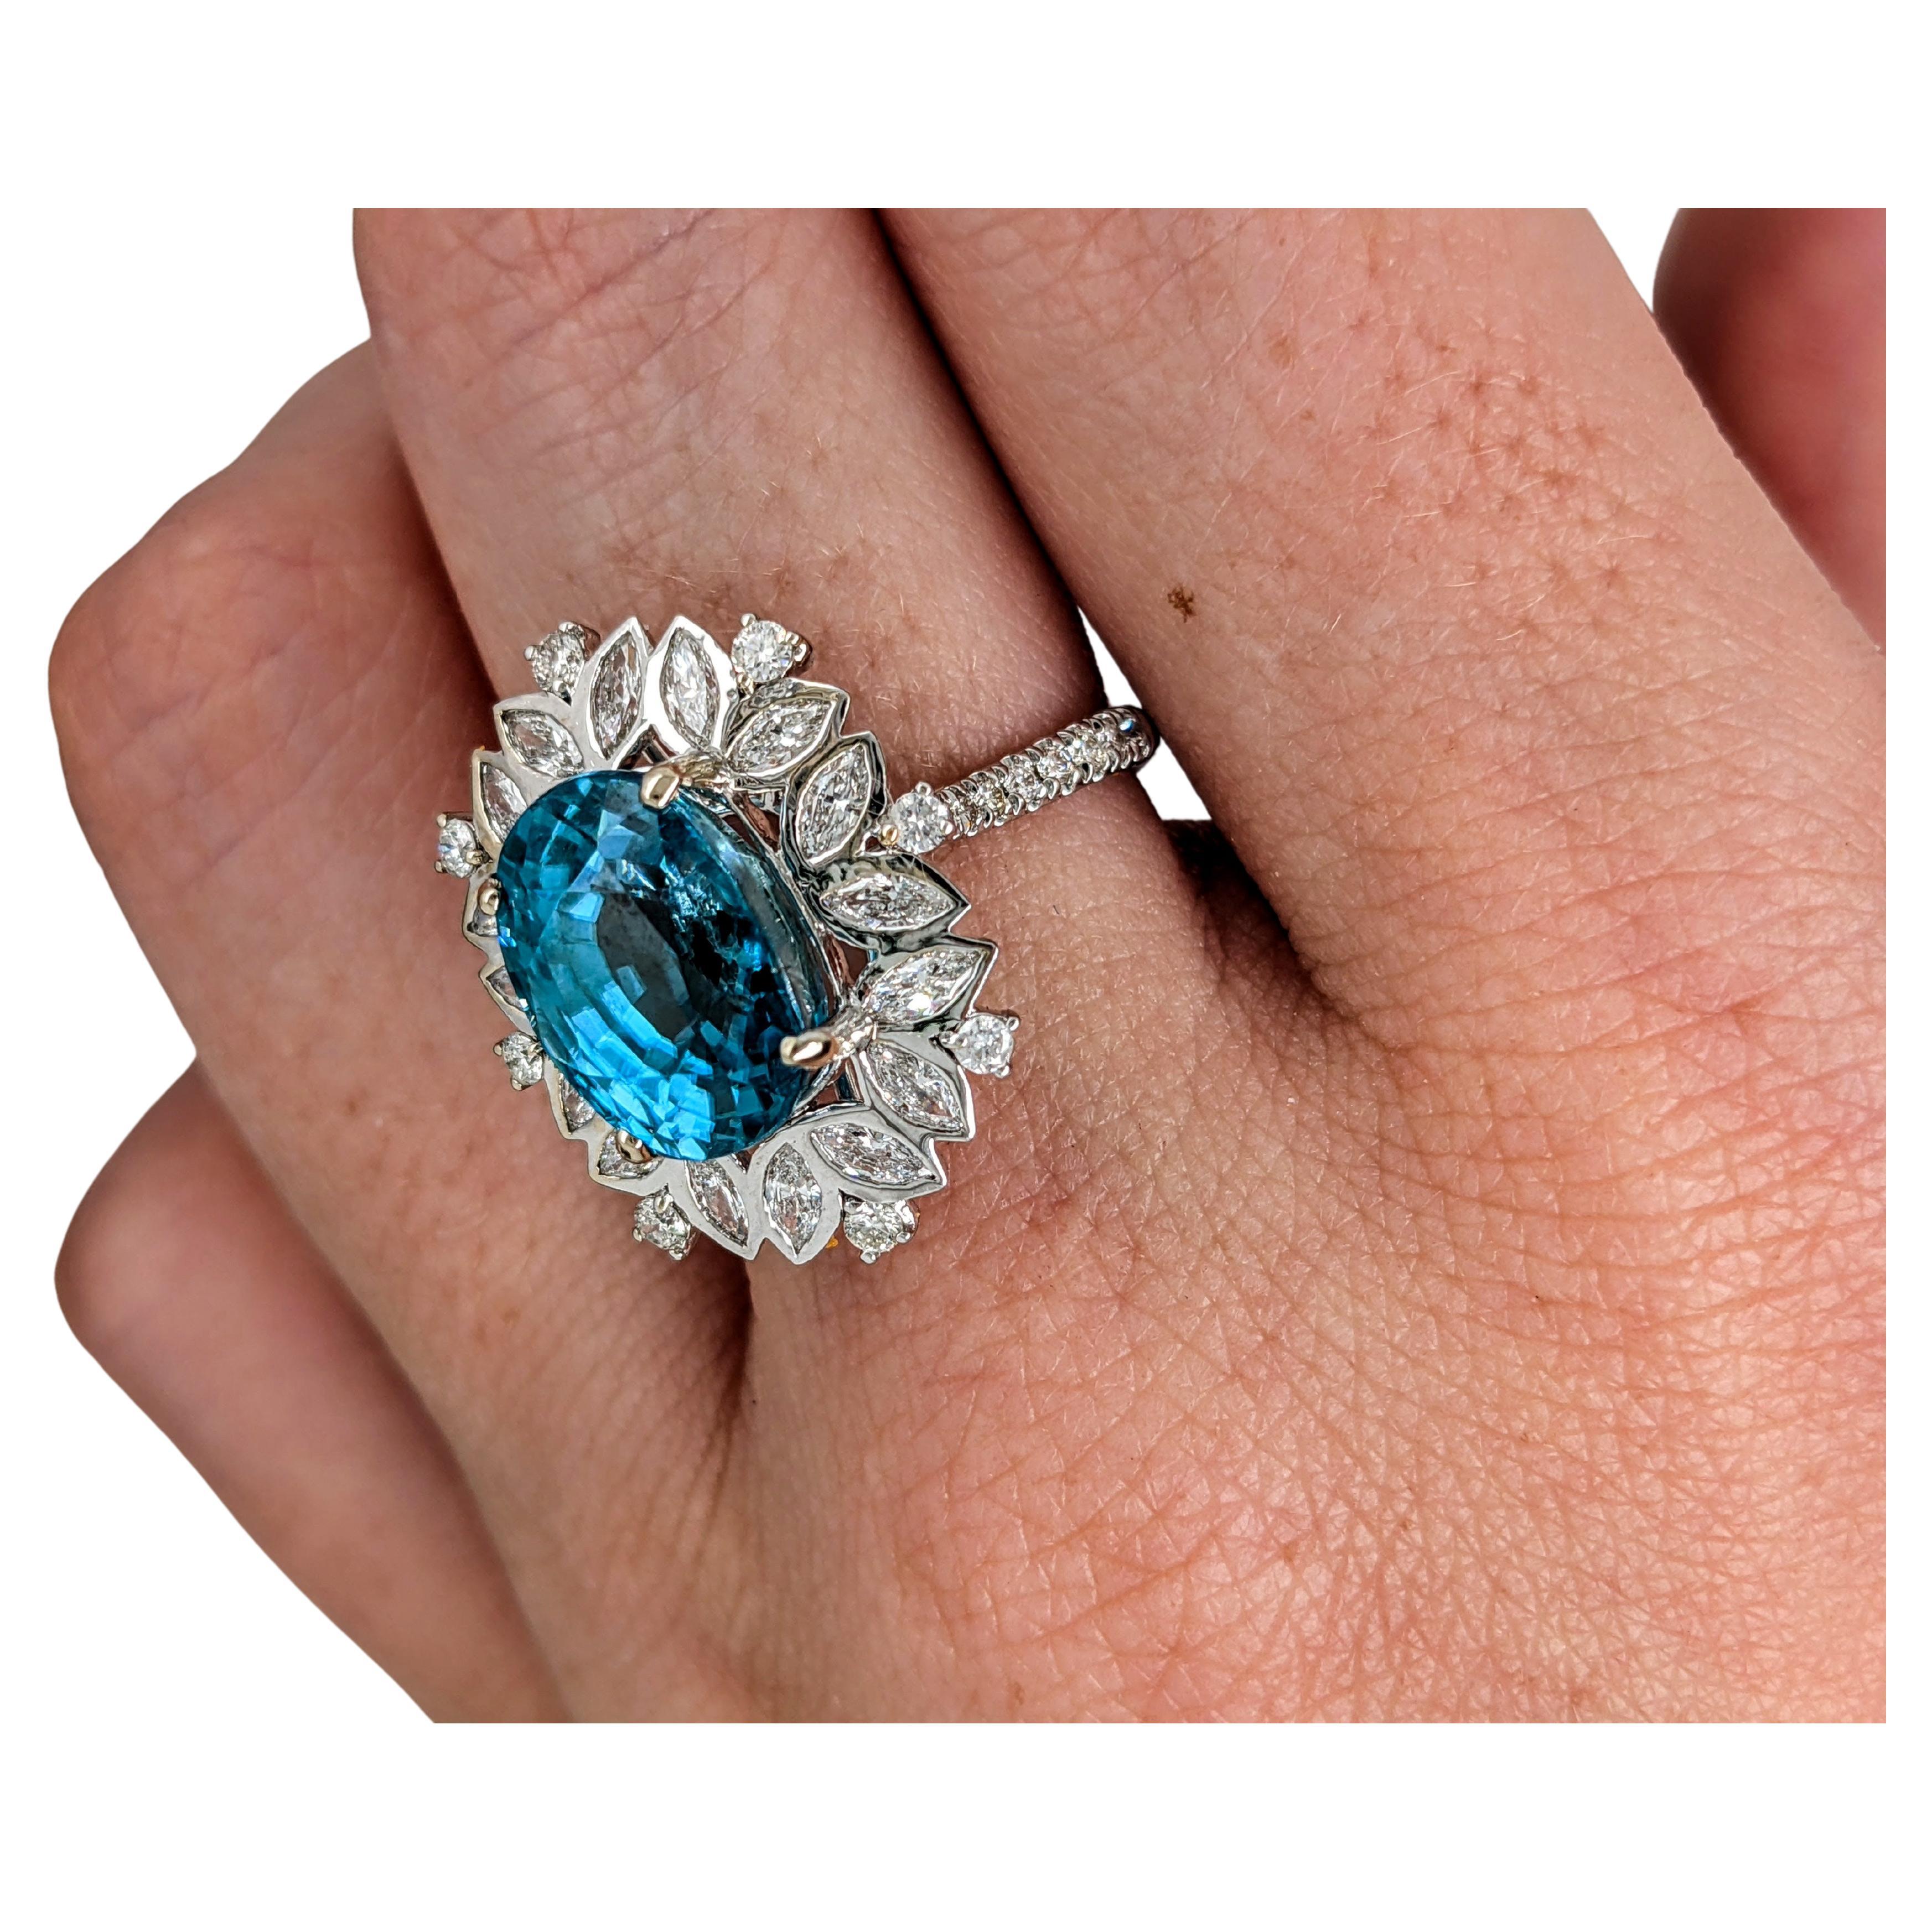 Introducing an exquisite blue zircon ring that commands attention with its breathtaking 10 carat center stone, adorned with the brilliance of natural diamond accents. This mesmerizing piece is a true marvel of beauty and sophistication, destined to